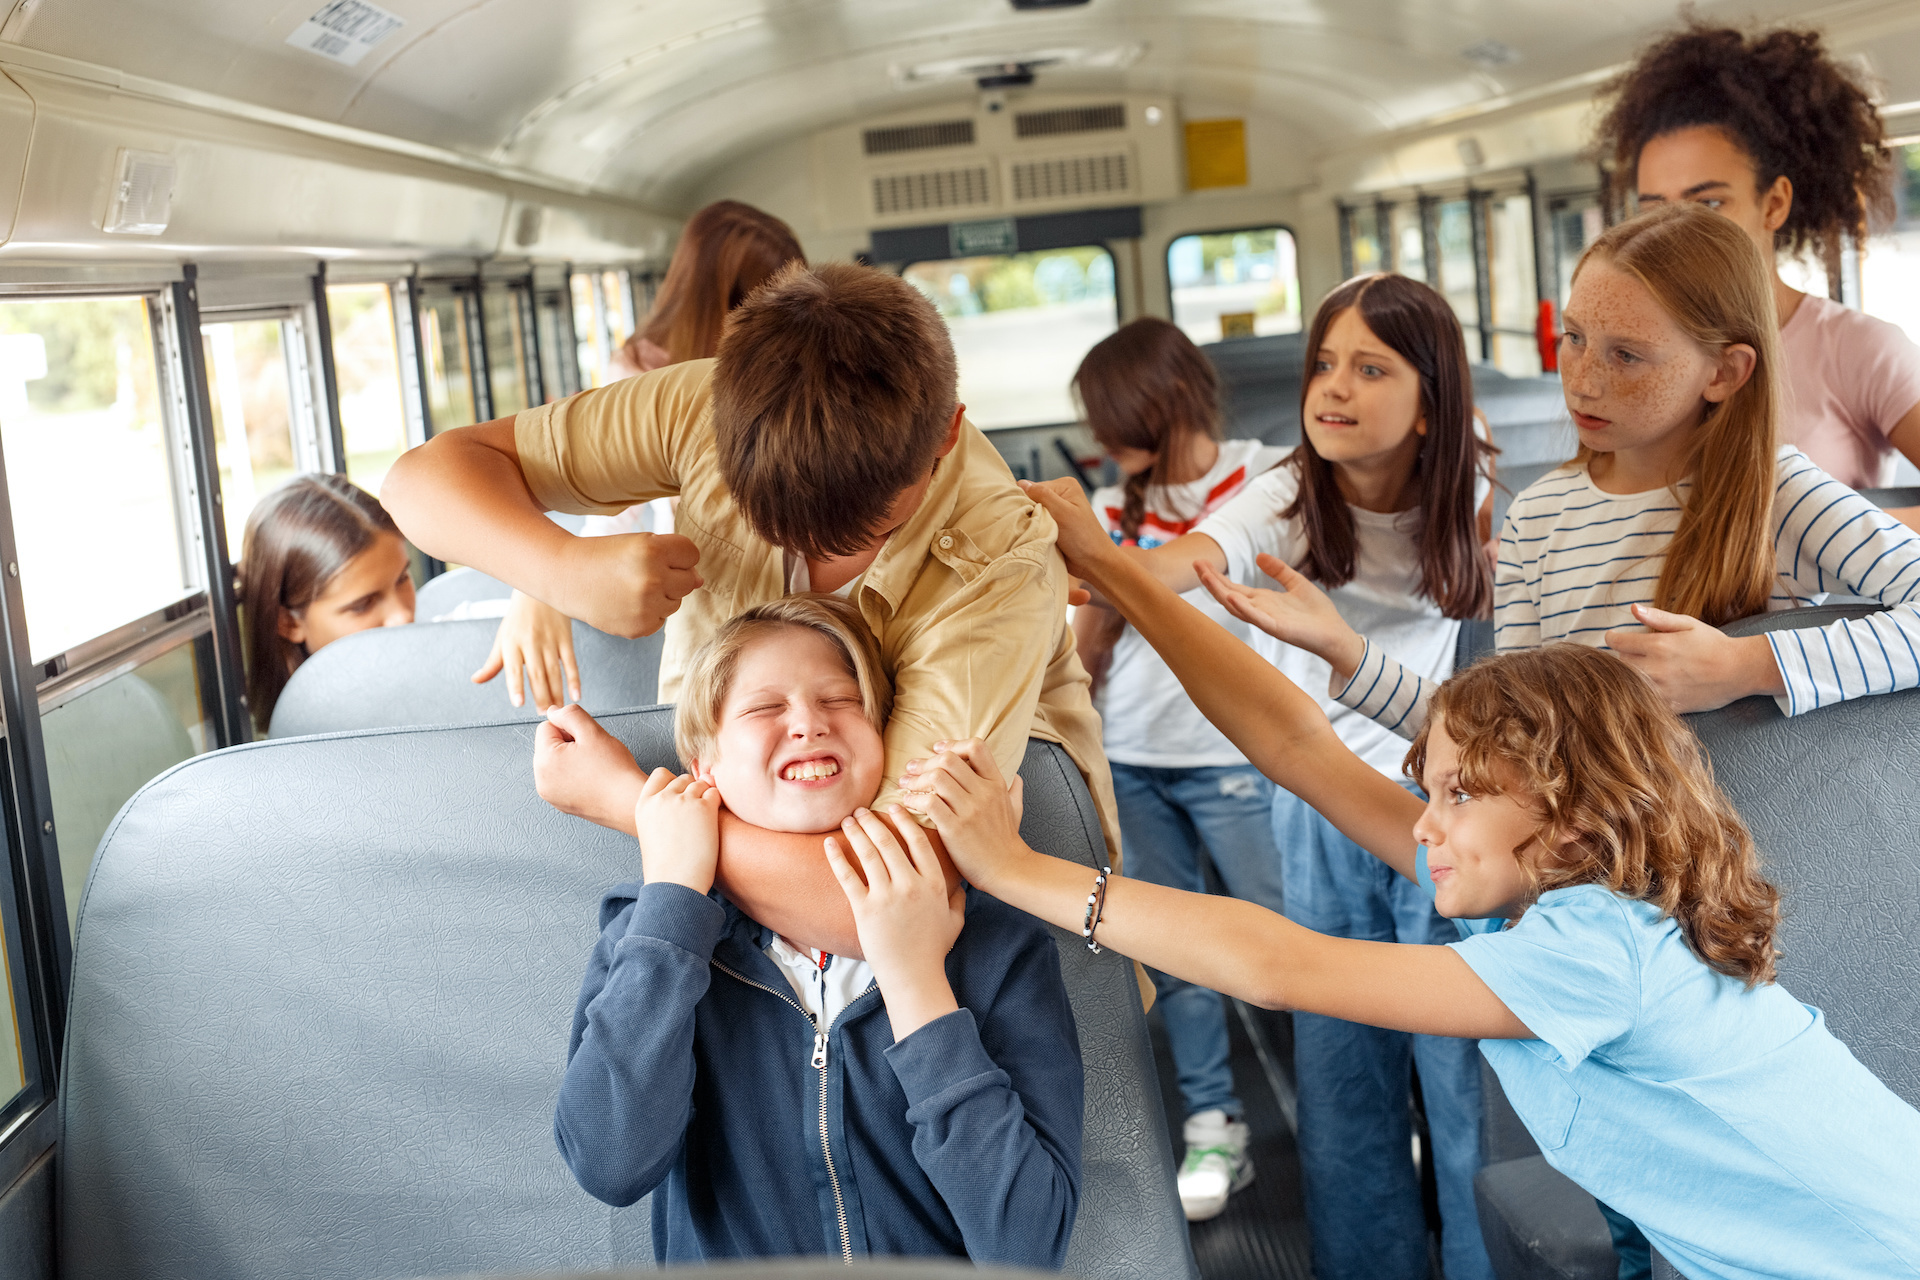 Lessons in Managing Student Behavior on the School Bus